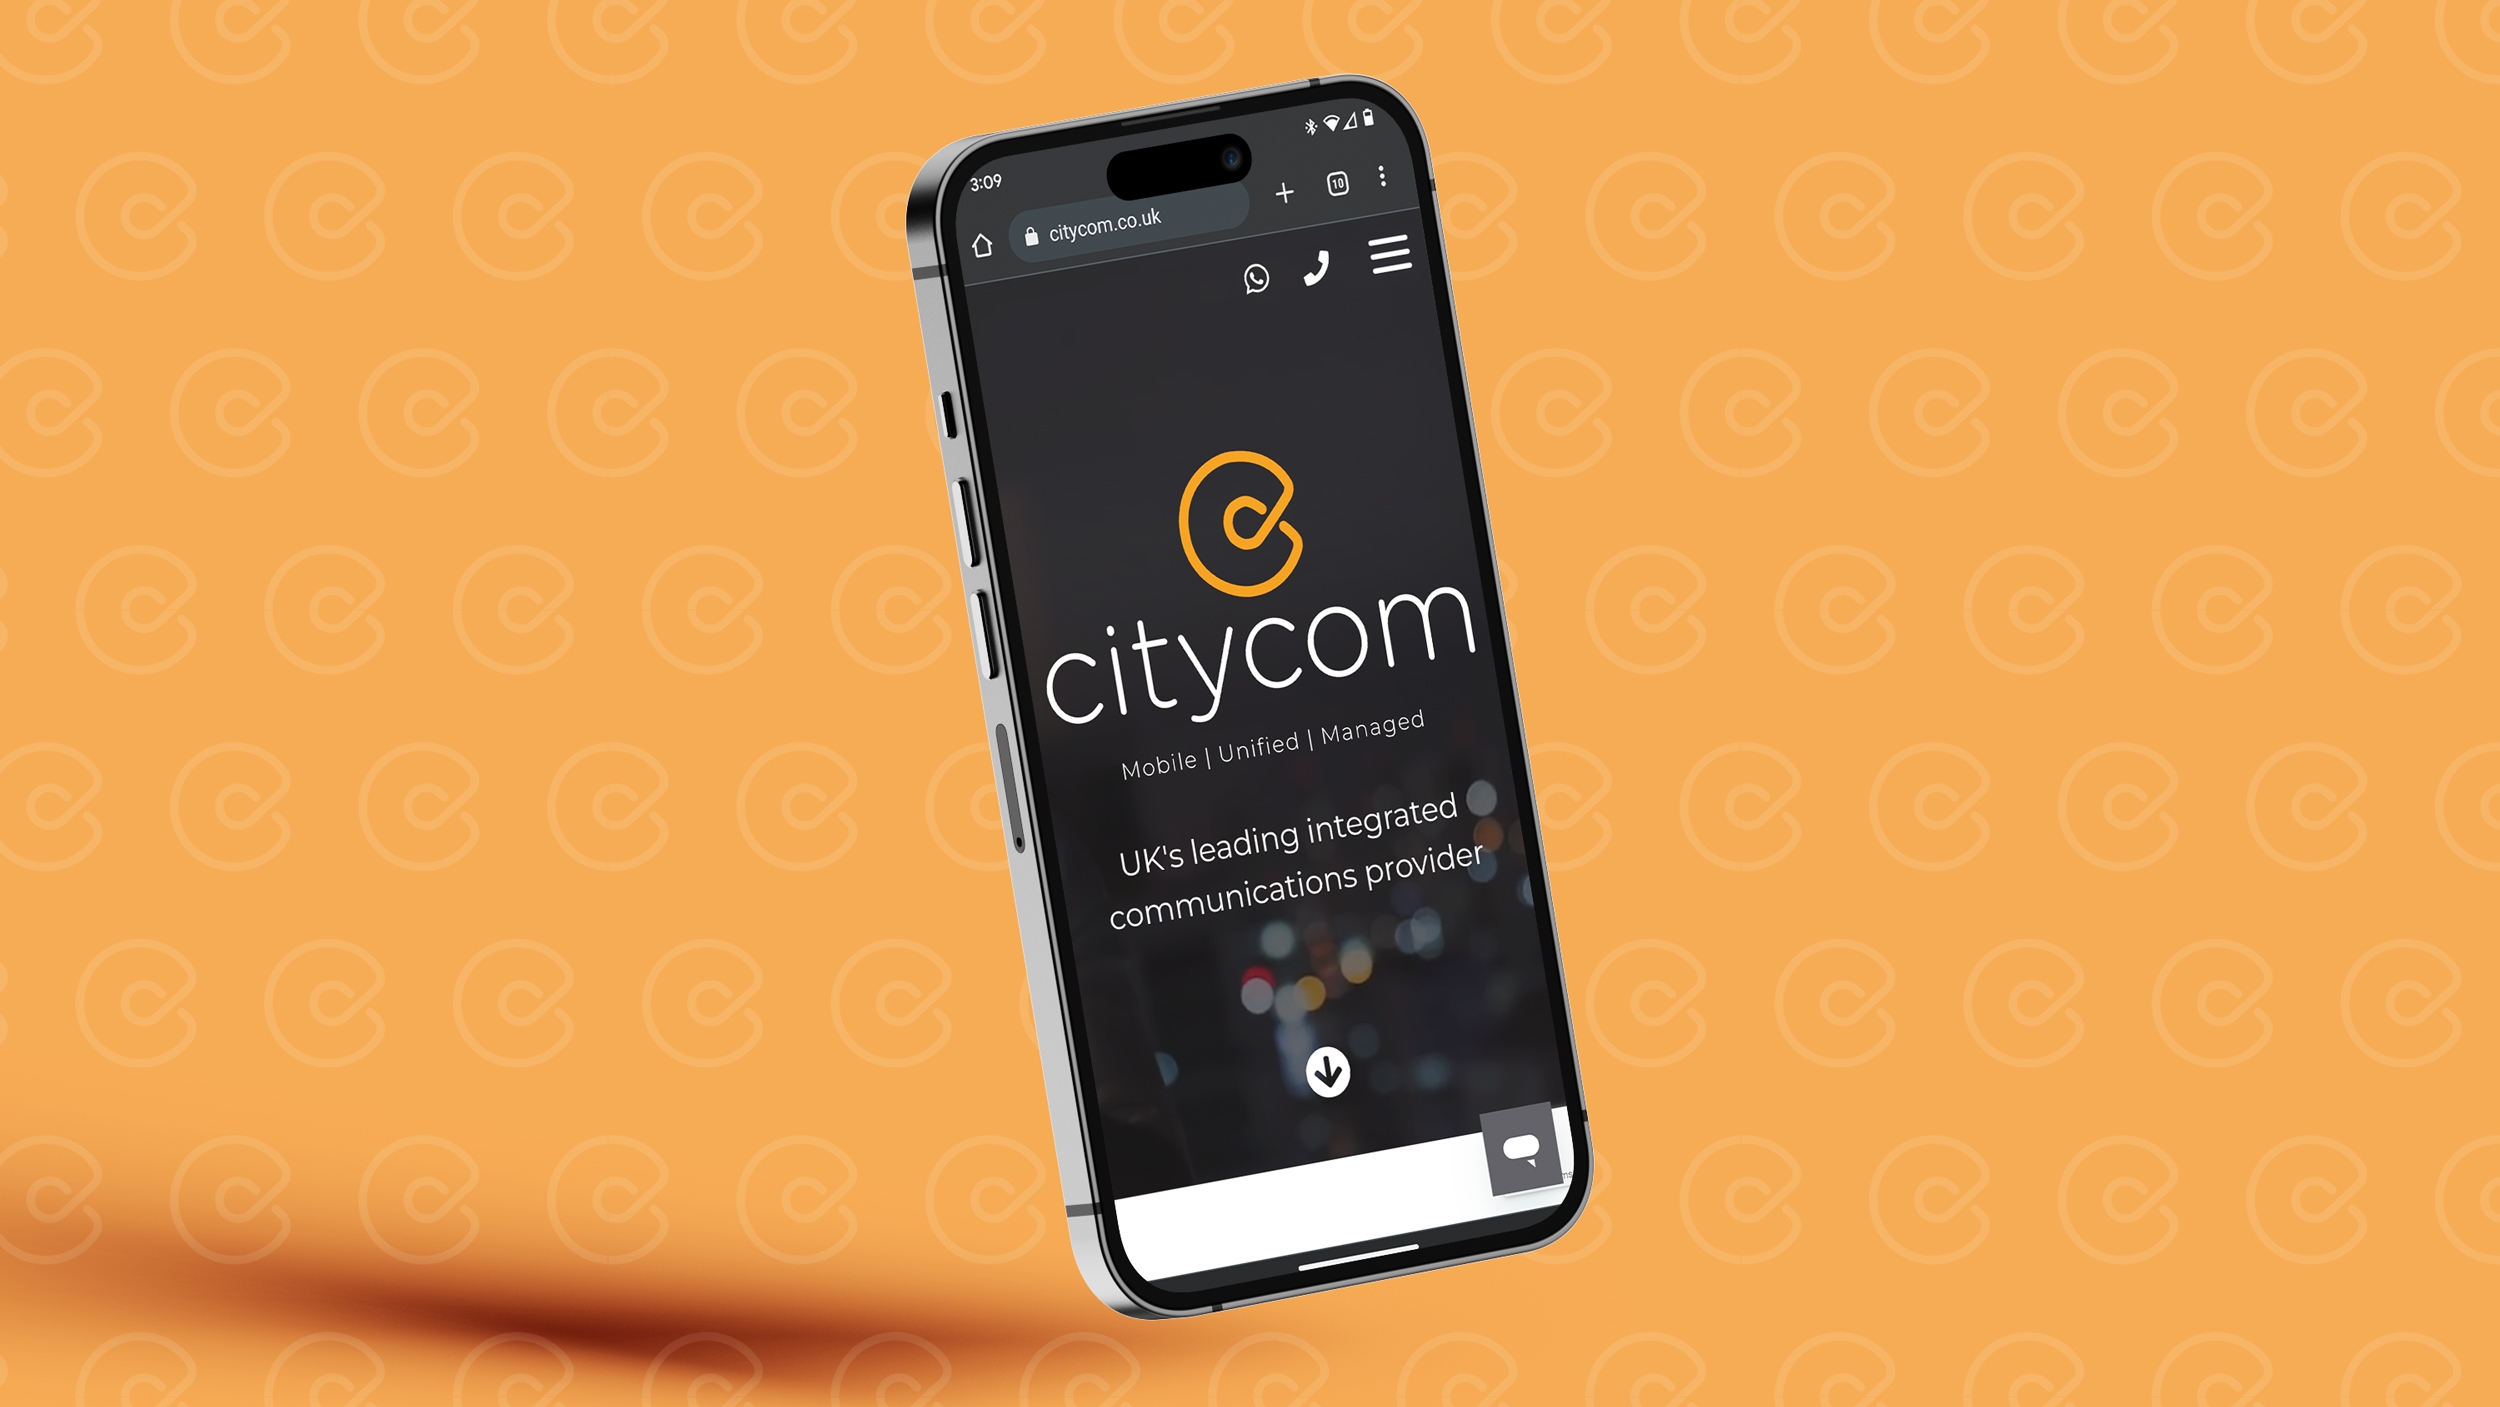 Citycom website shown on a mobile phone